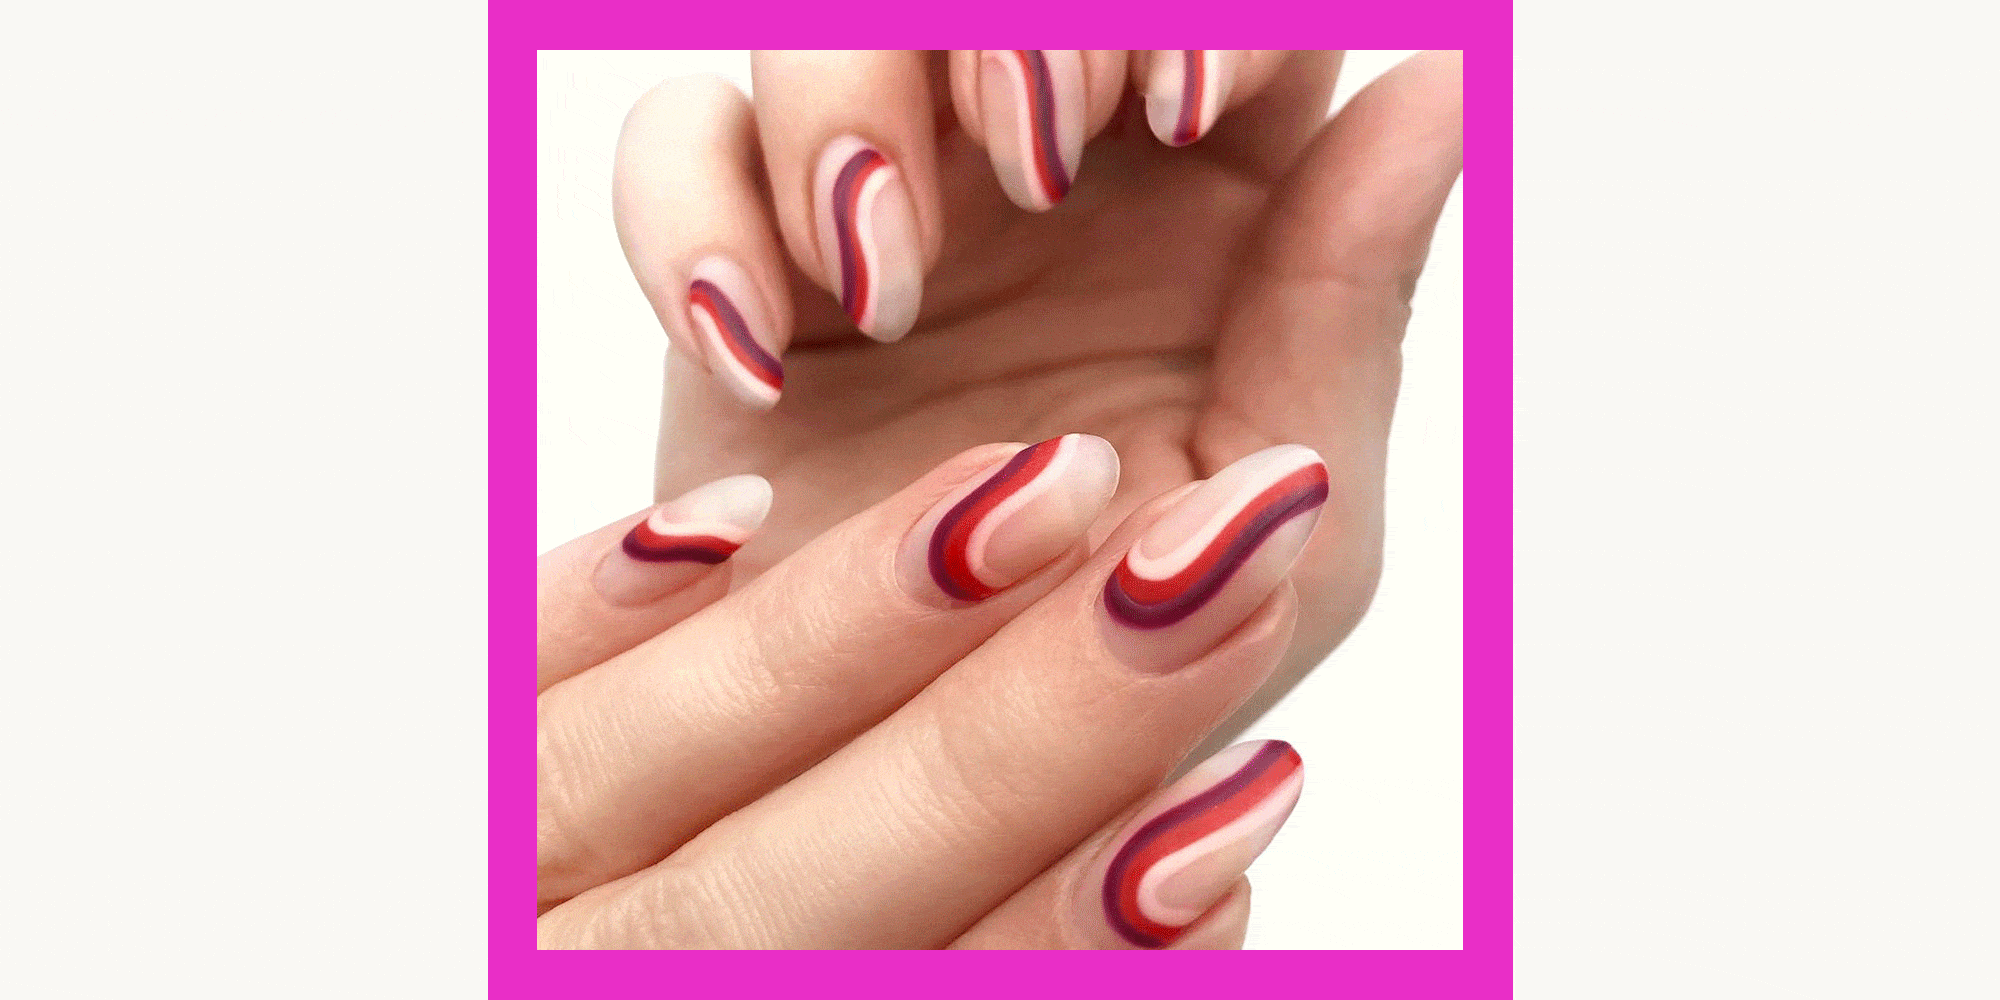 3. "Valentine's Day Nail Designs That Will Make You Swoon" - wide 2